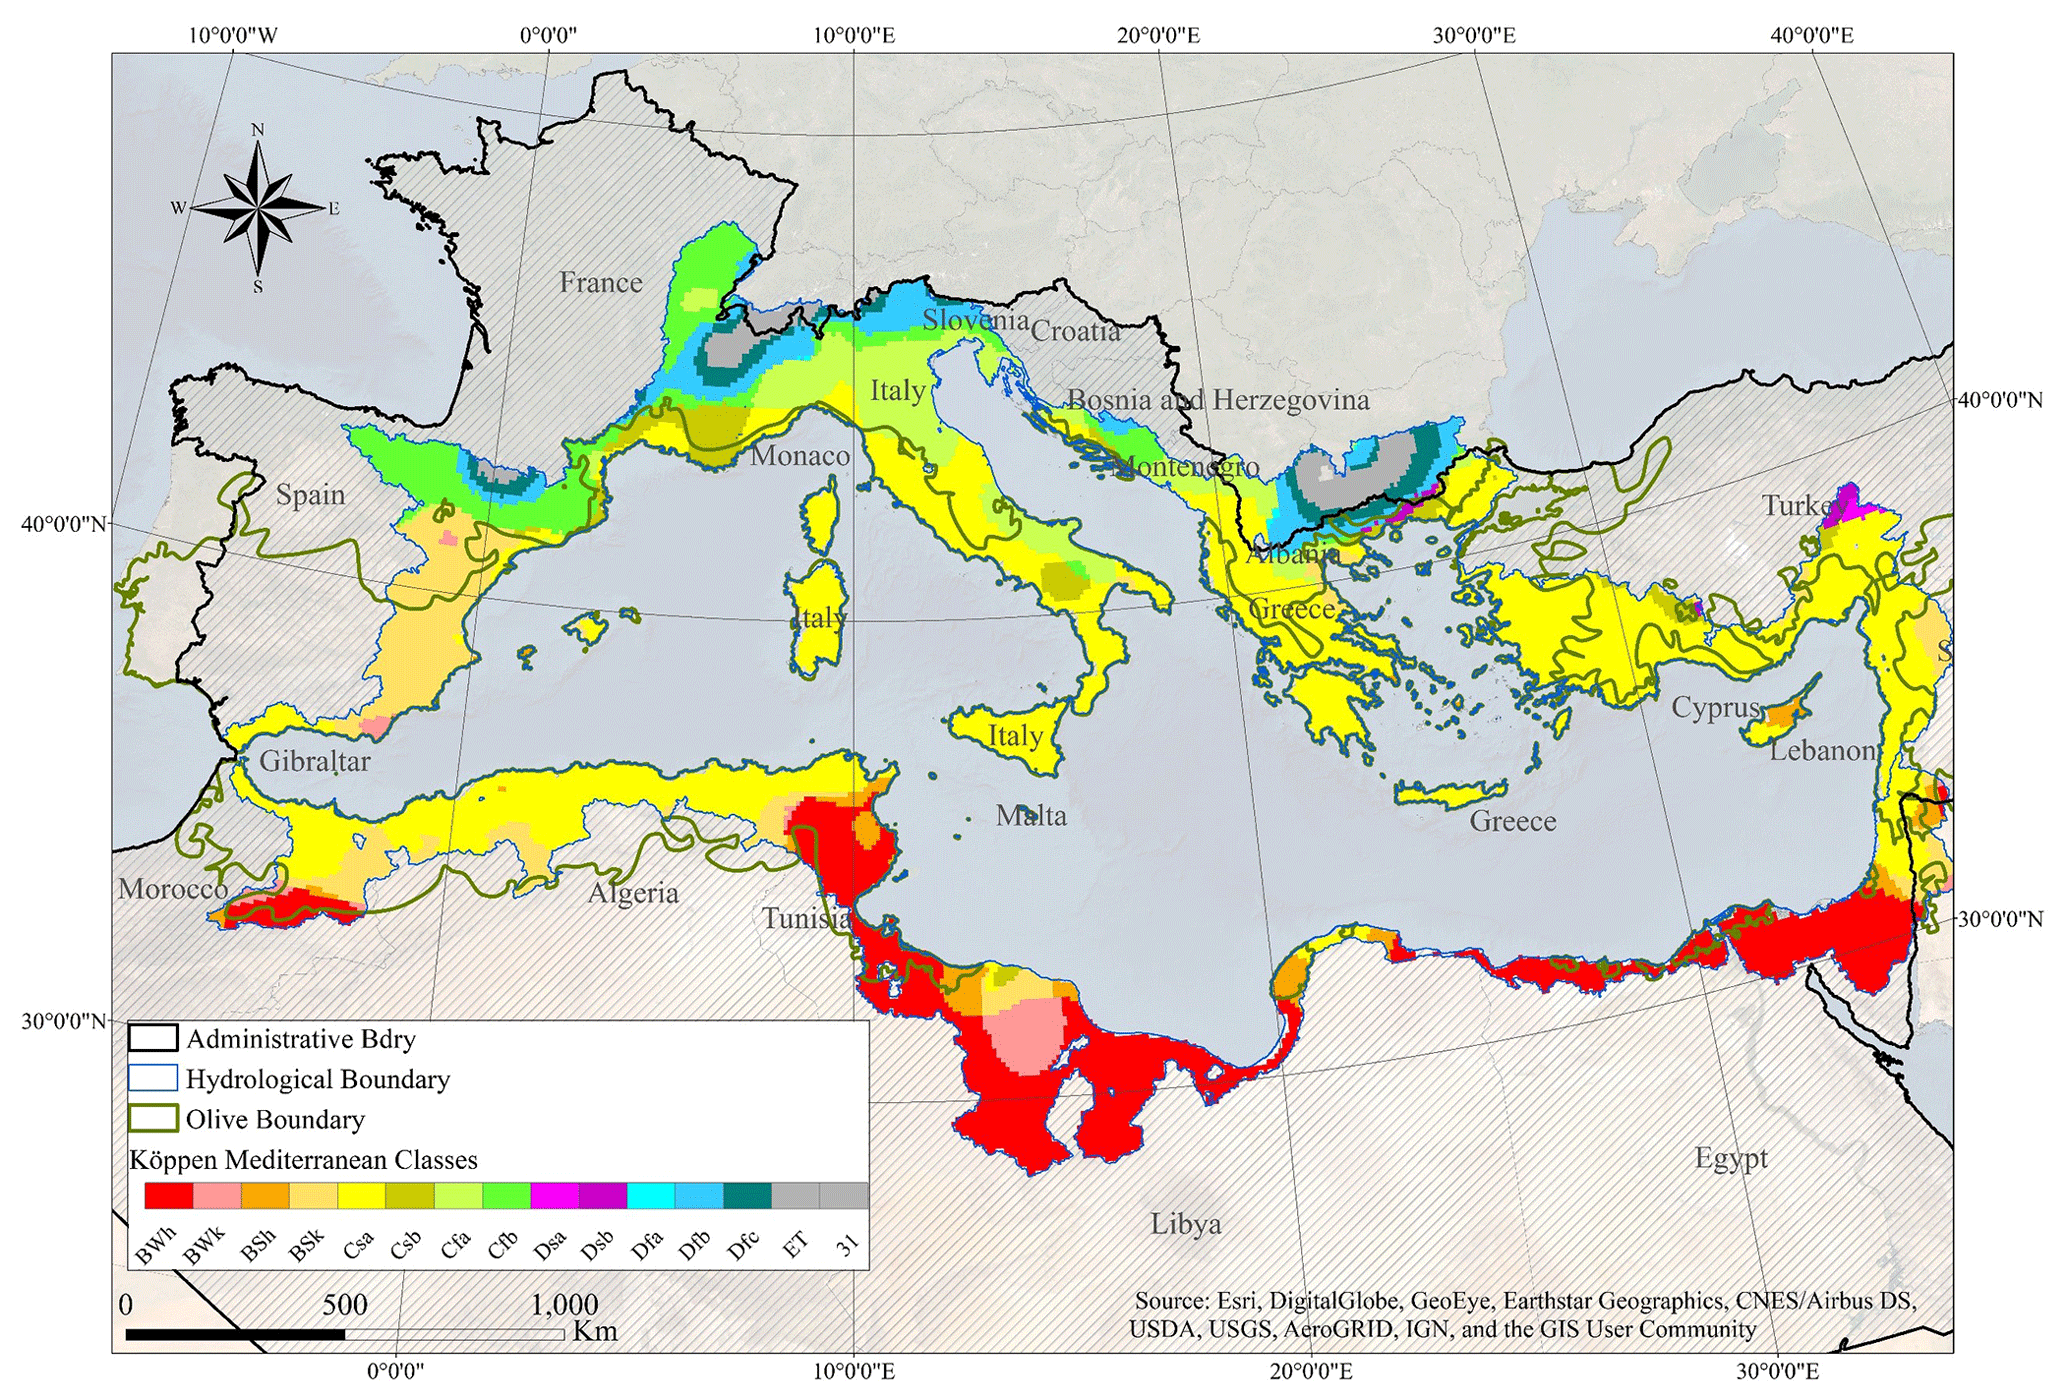 Hess Specific Climate Classification For Mediterranean Hydrology And Future Evolution Under